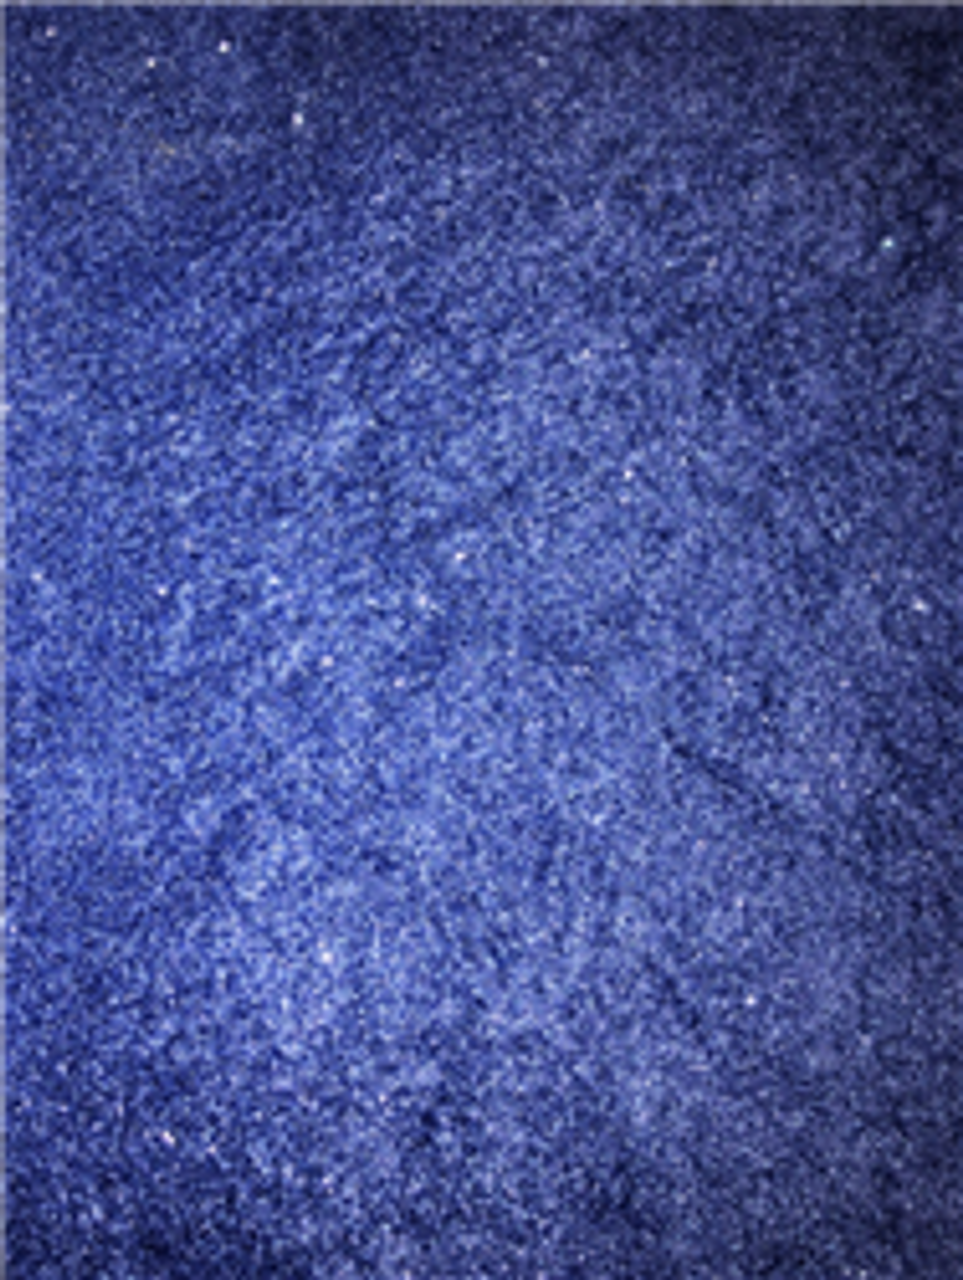 1/4# Periwinkle Cosmetic Glitter